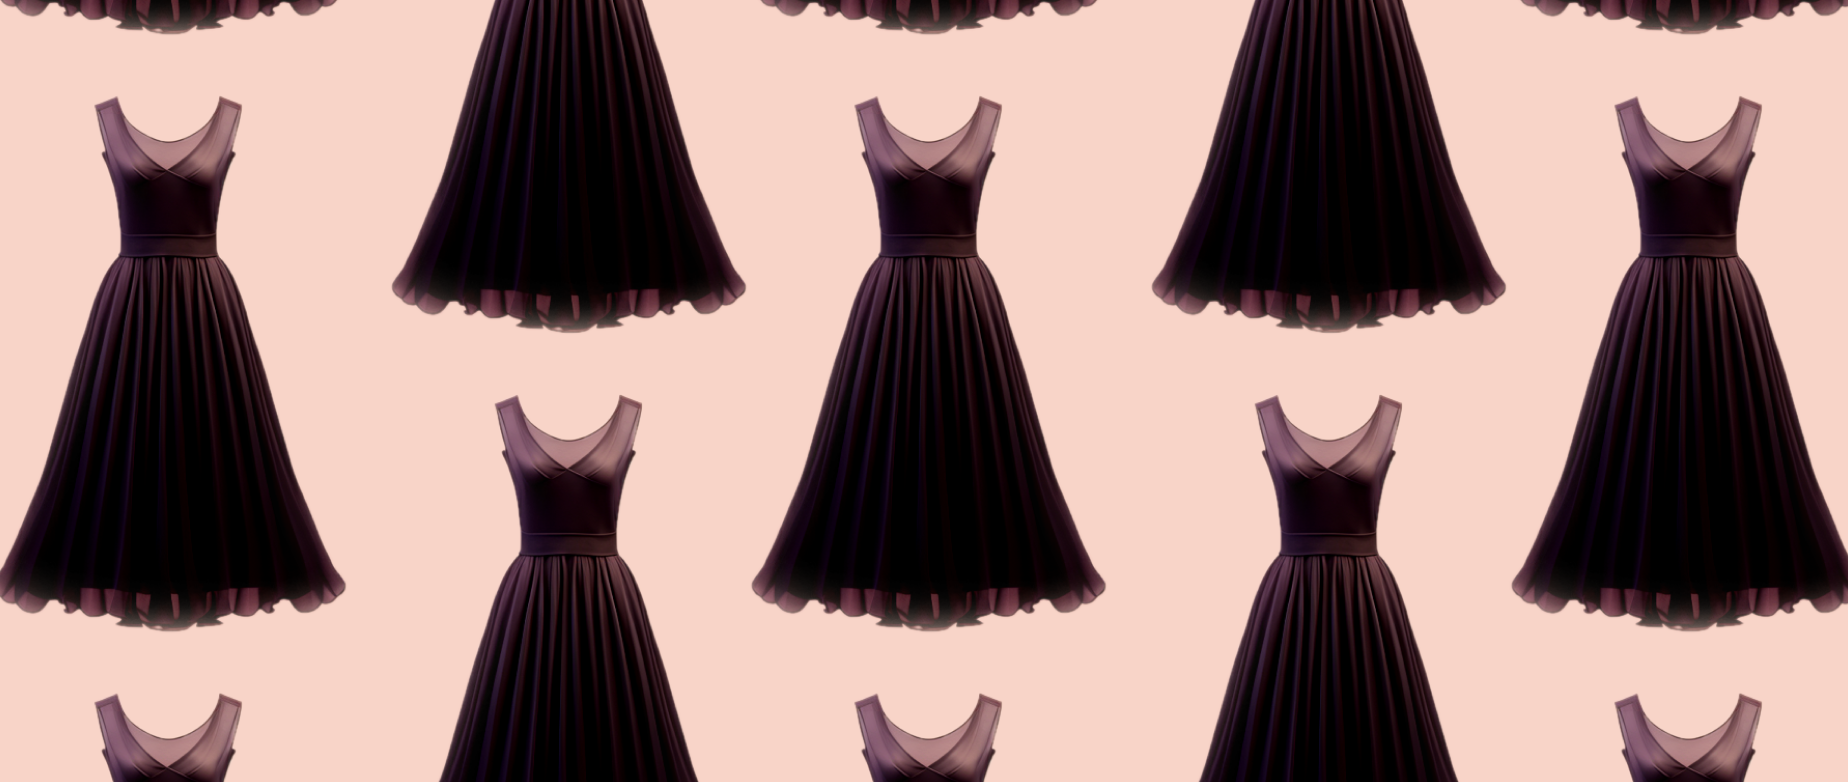 black dresses on a salmon colored background